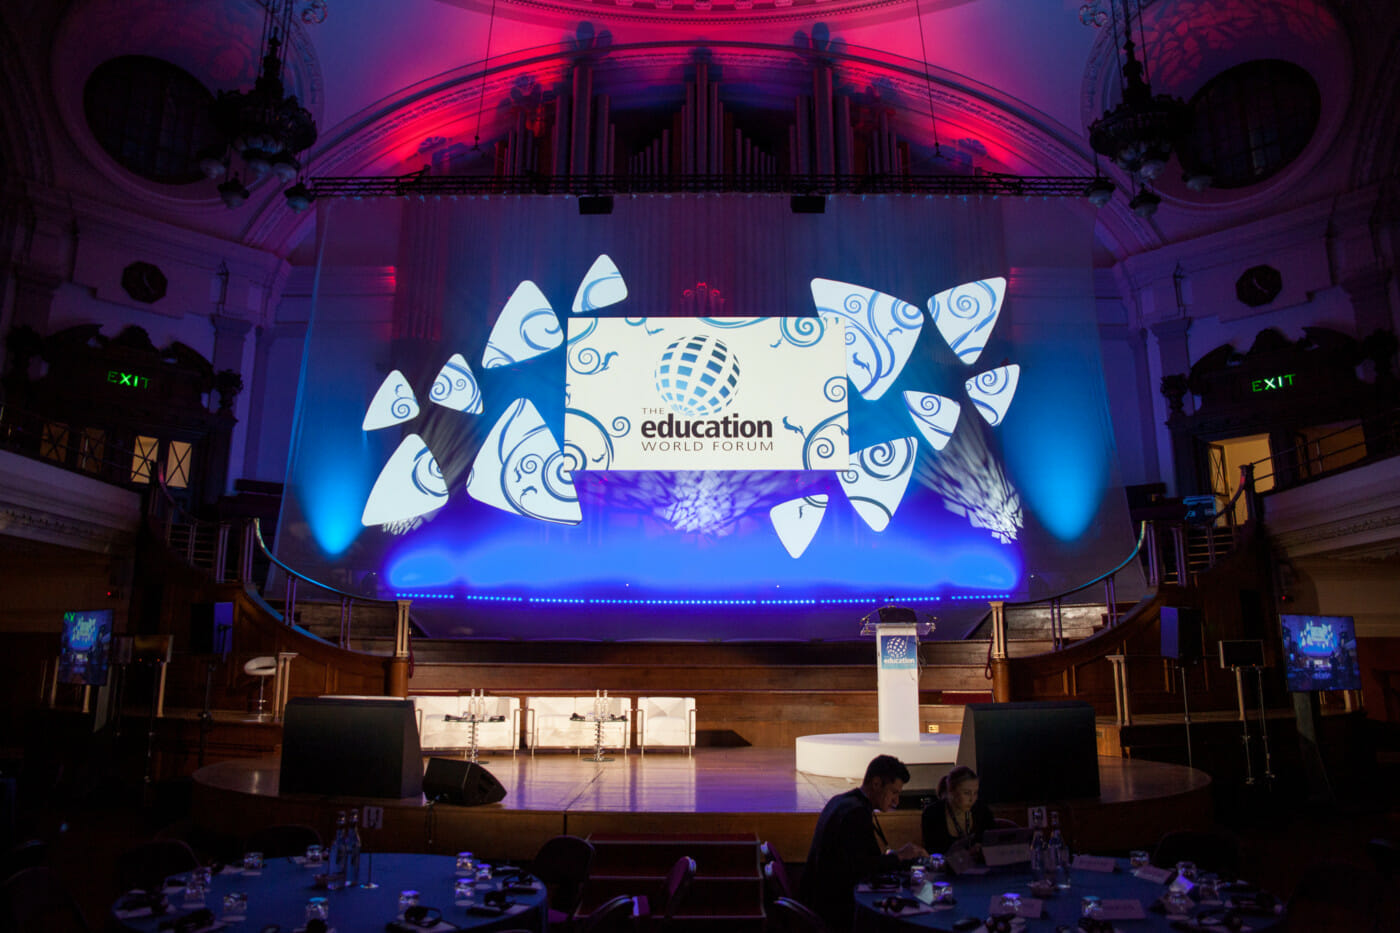 Gala night and dinner with mood lights at The Education World Seminar